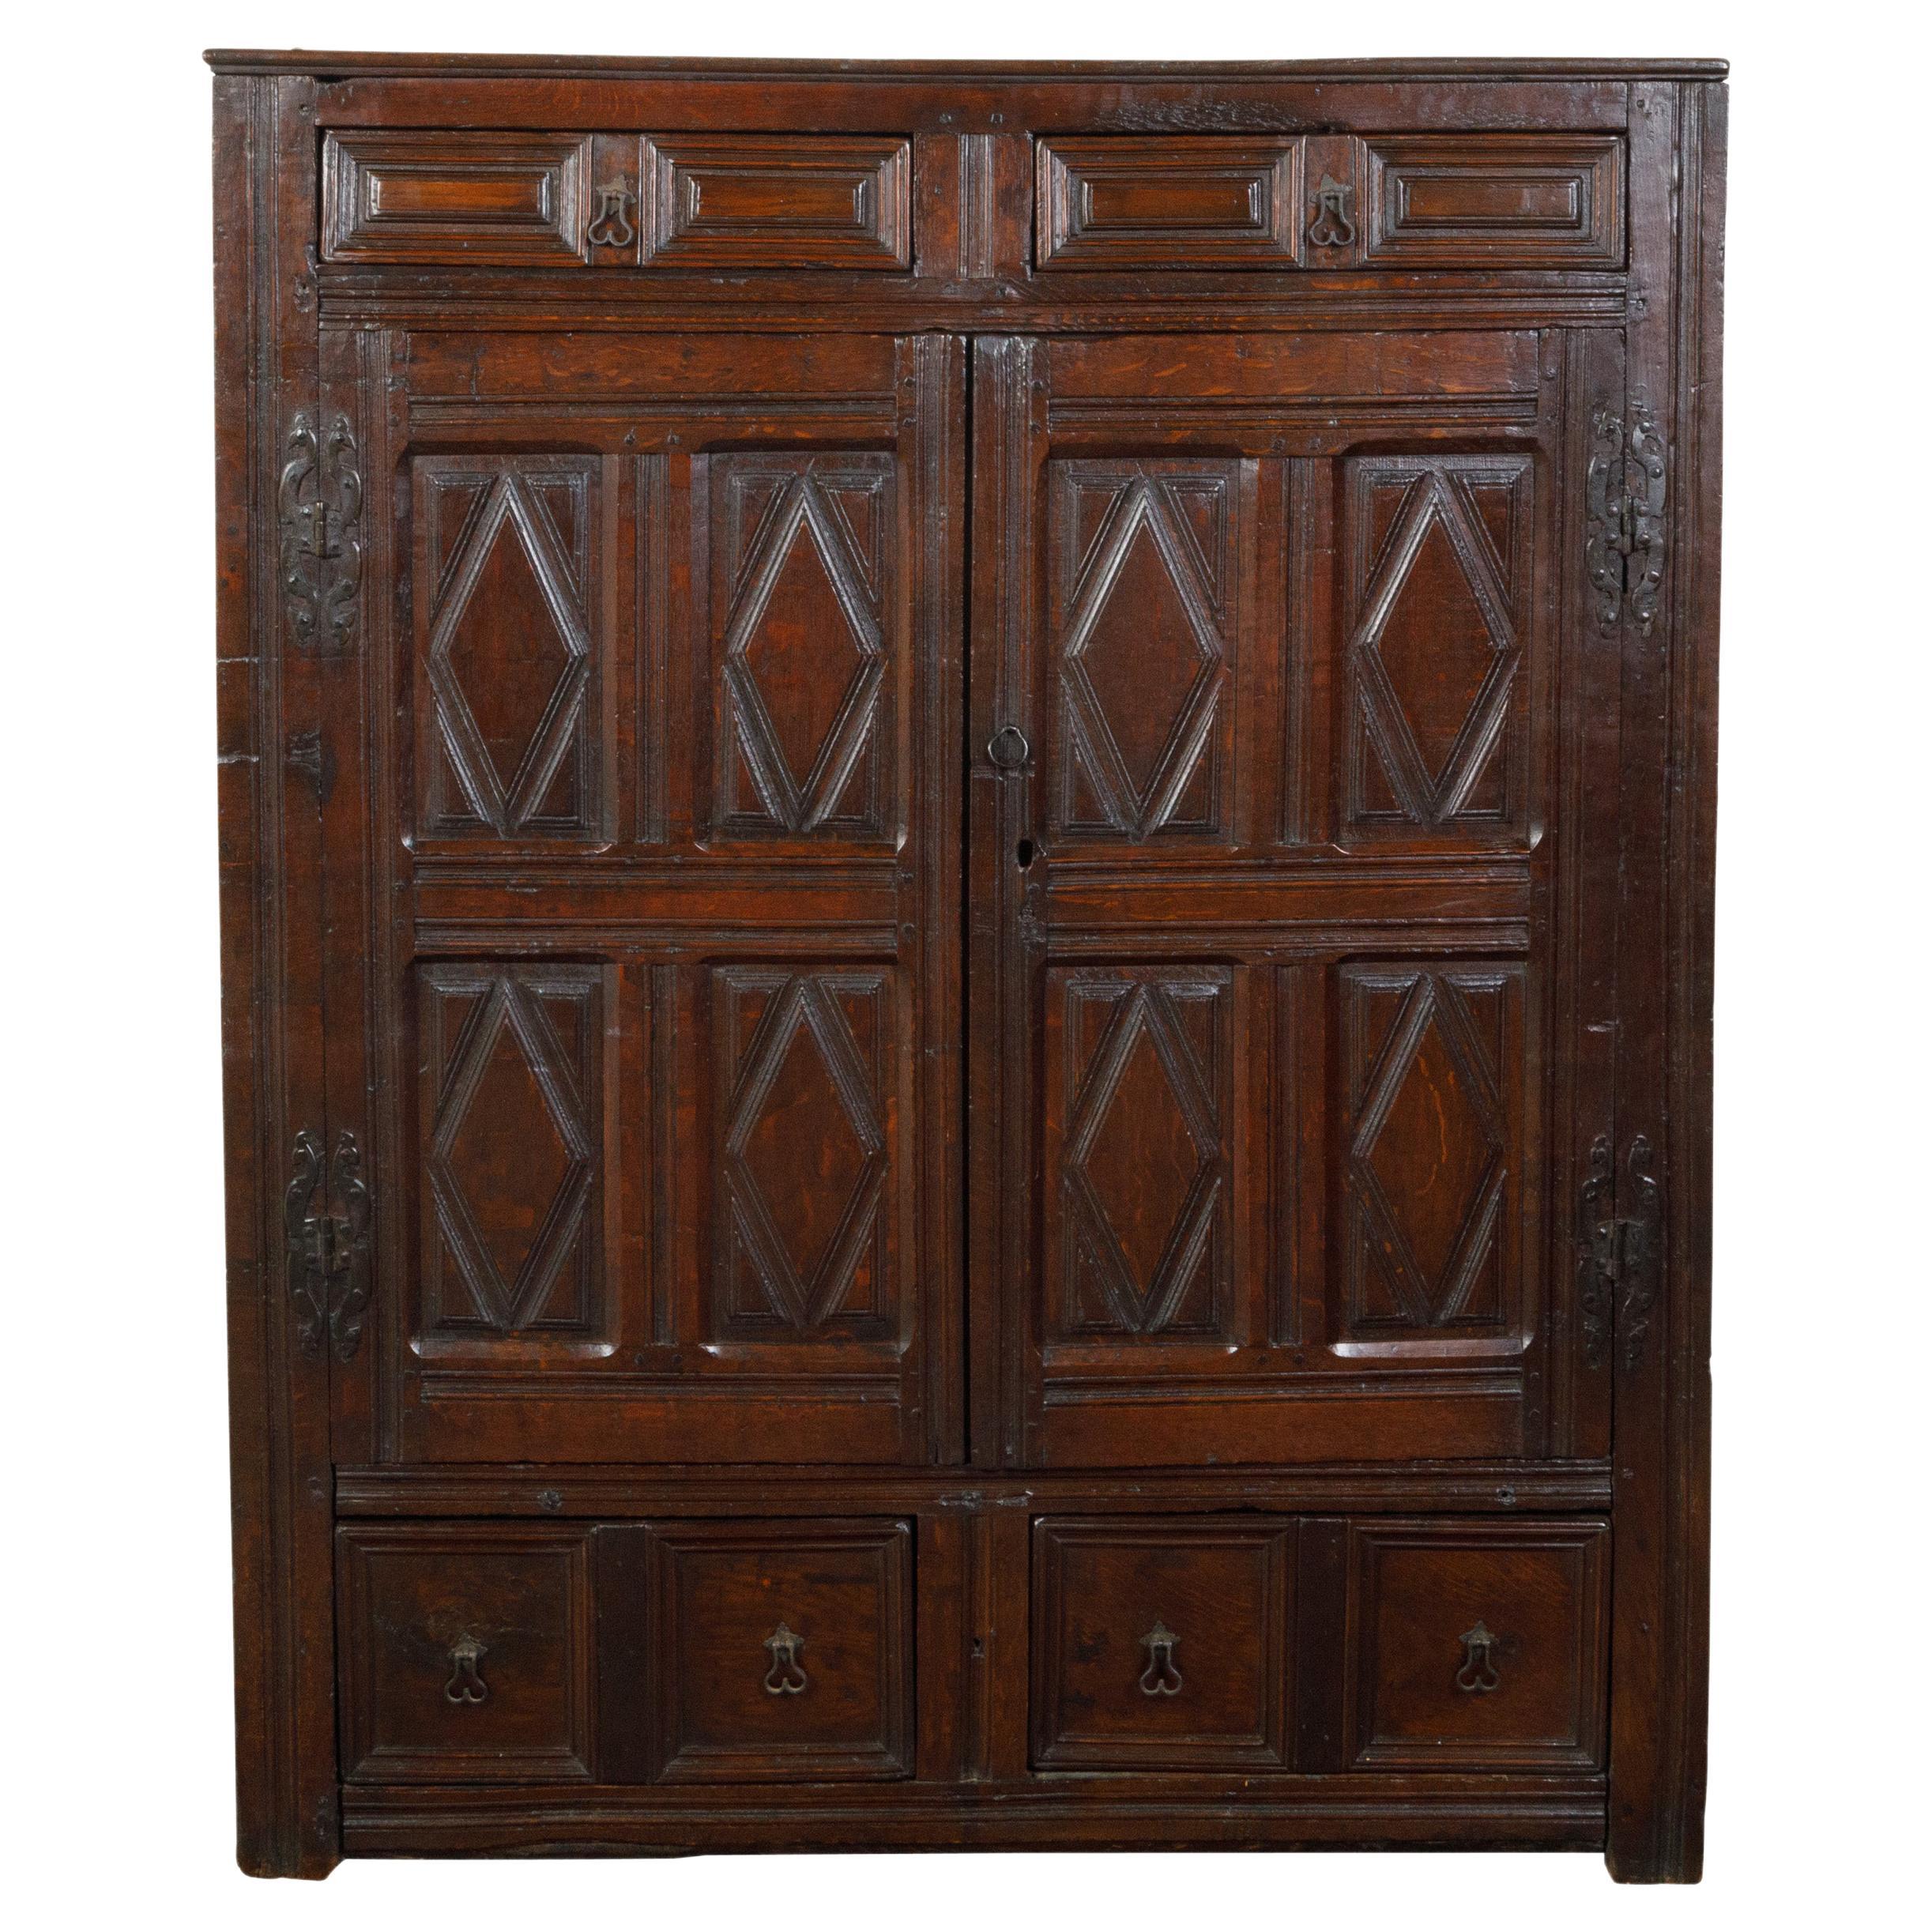 English 1800s Wooden Court Cupboard with Doors, Drawers and Diamond Motifs For Sale